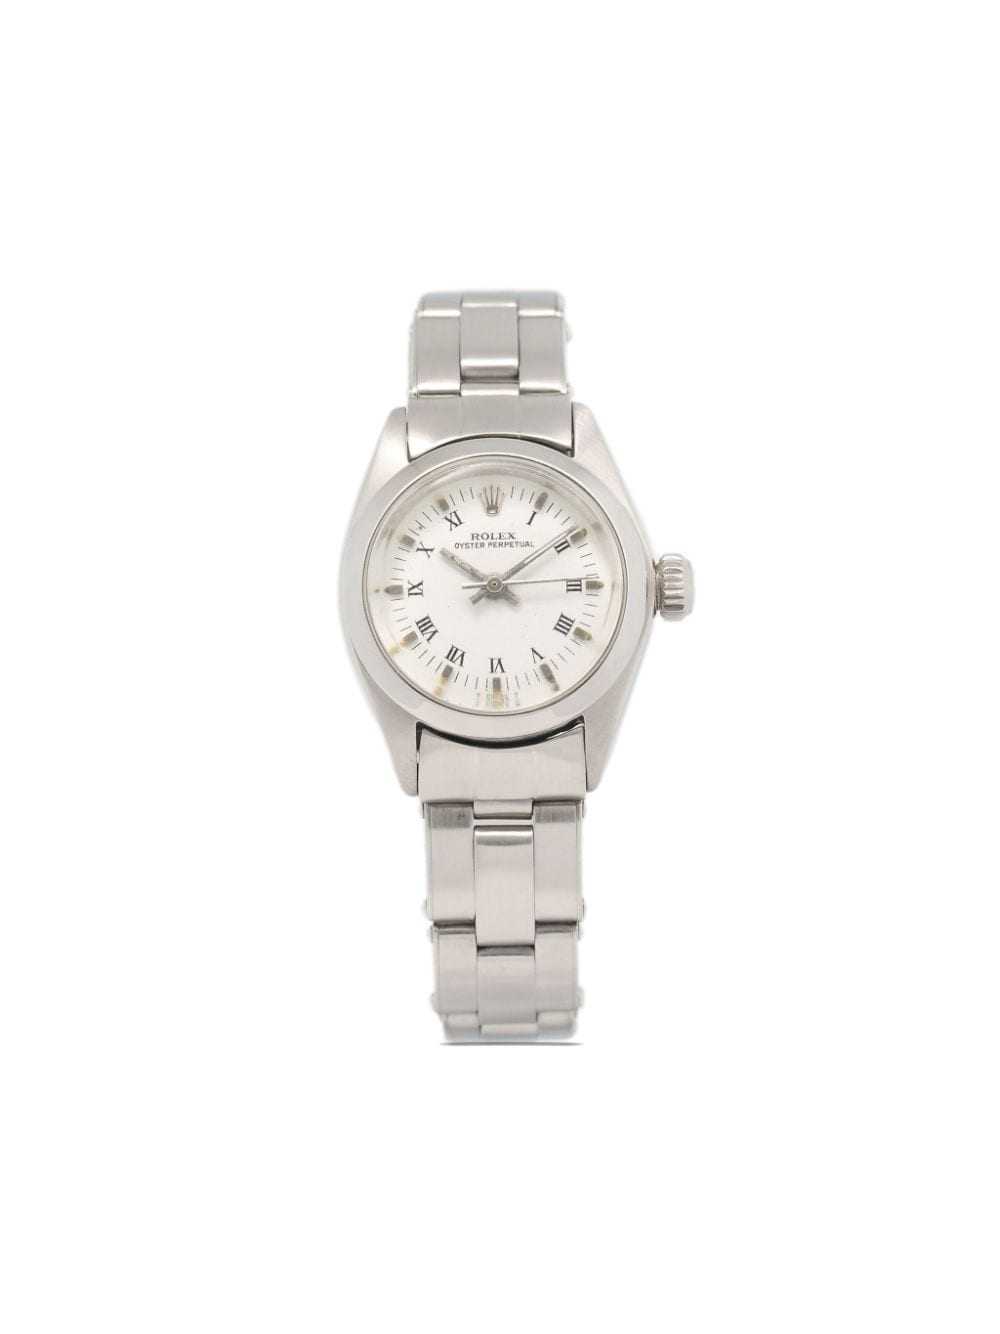 Rolex pre-owned Oyster Perpetual 24mm - White - image 1